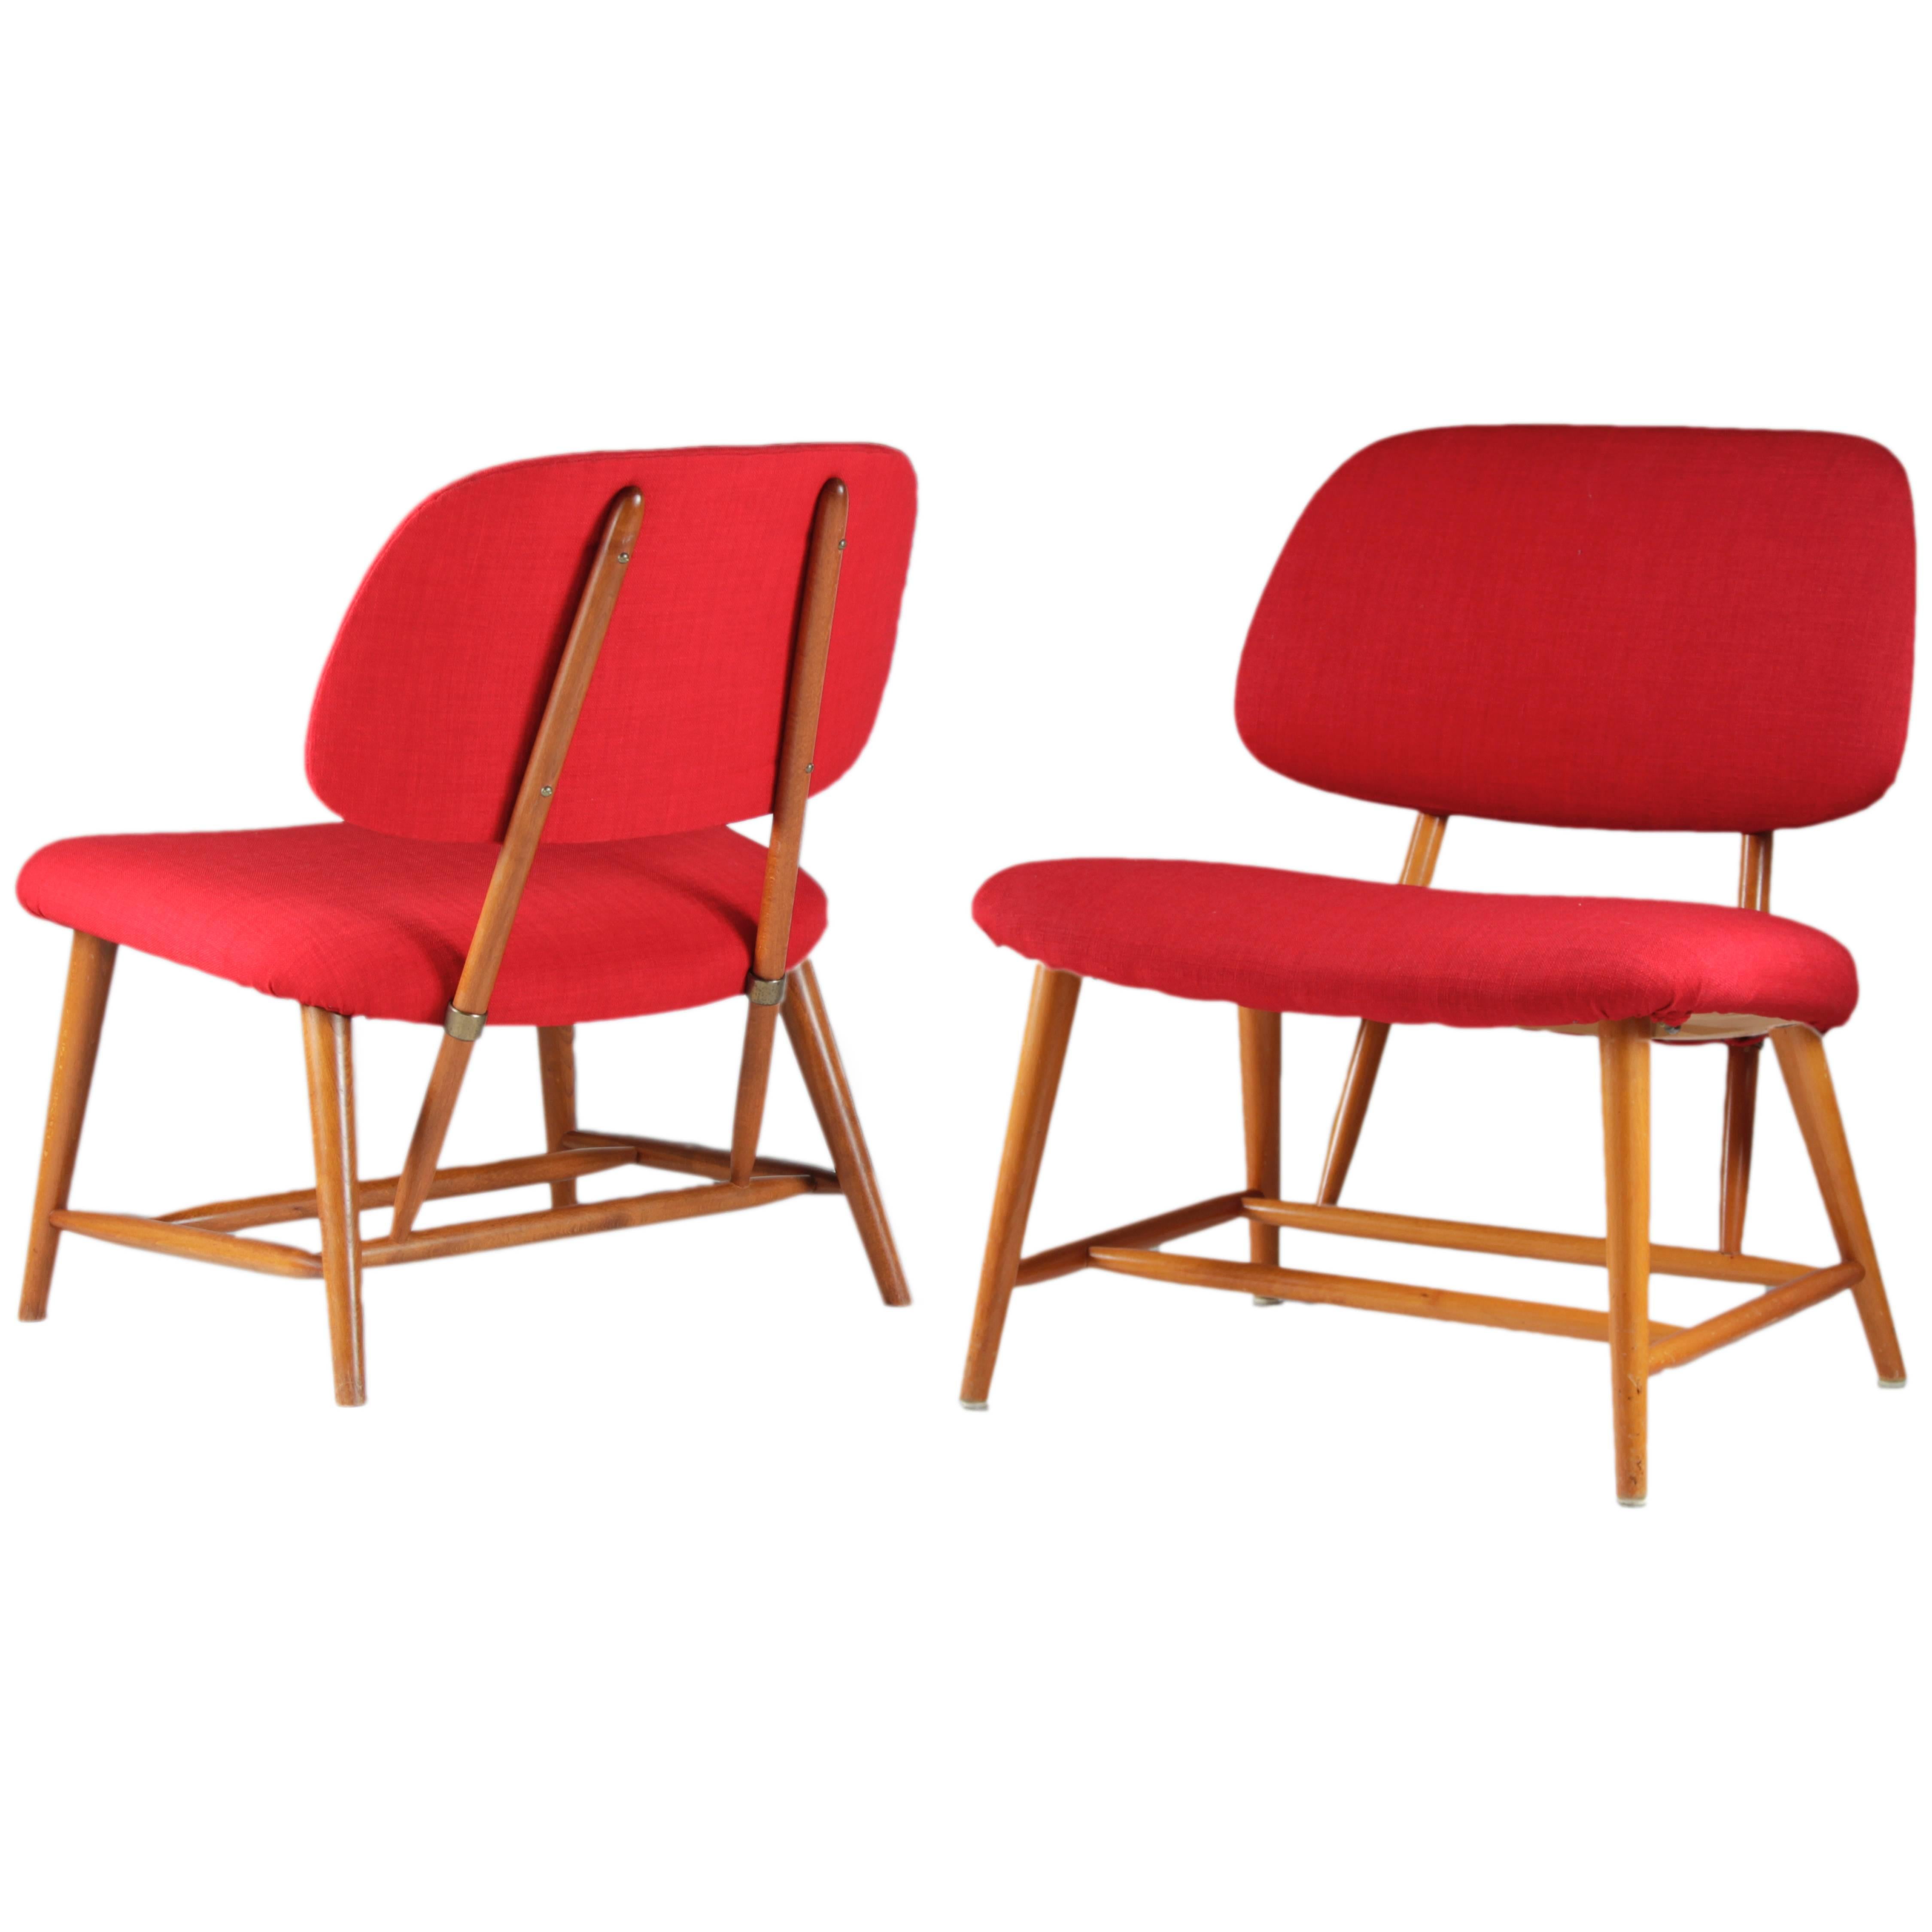 "TeVe" Chairs by Alf Svensson for Ljungs Industrier, 1953